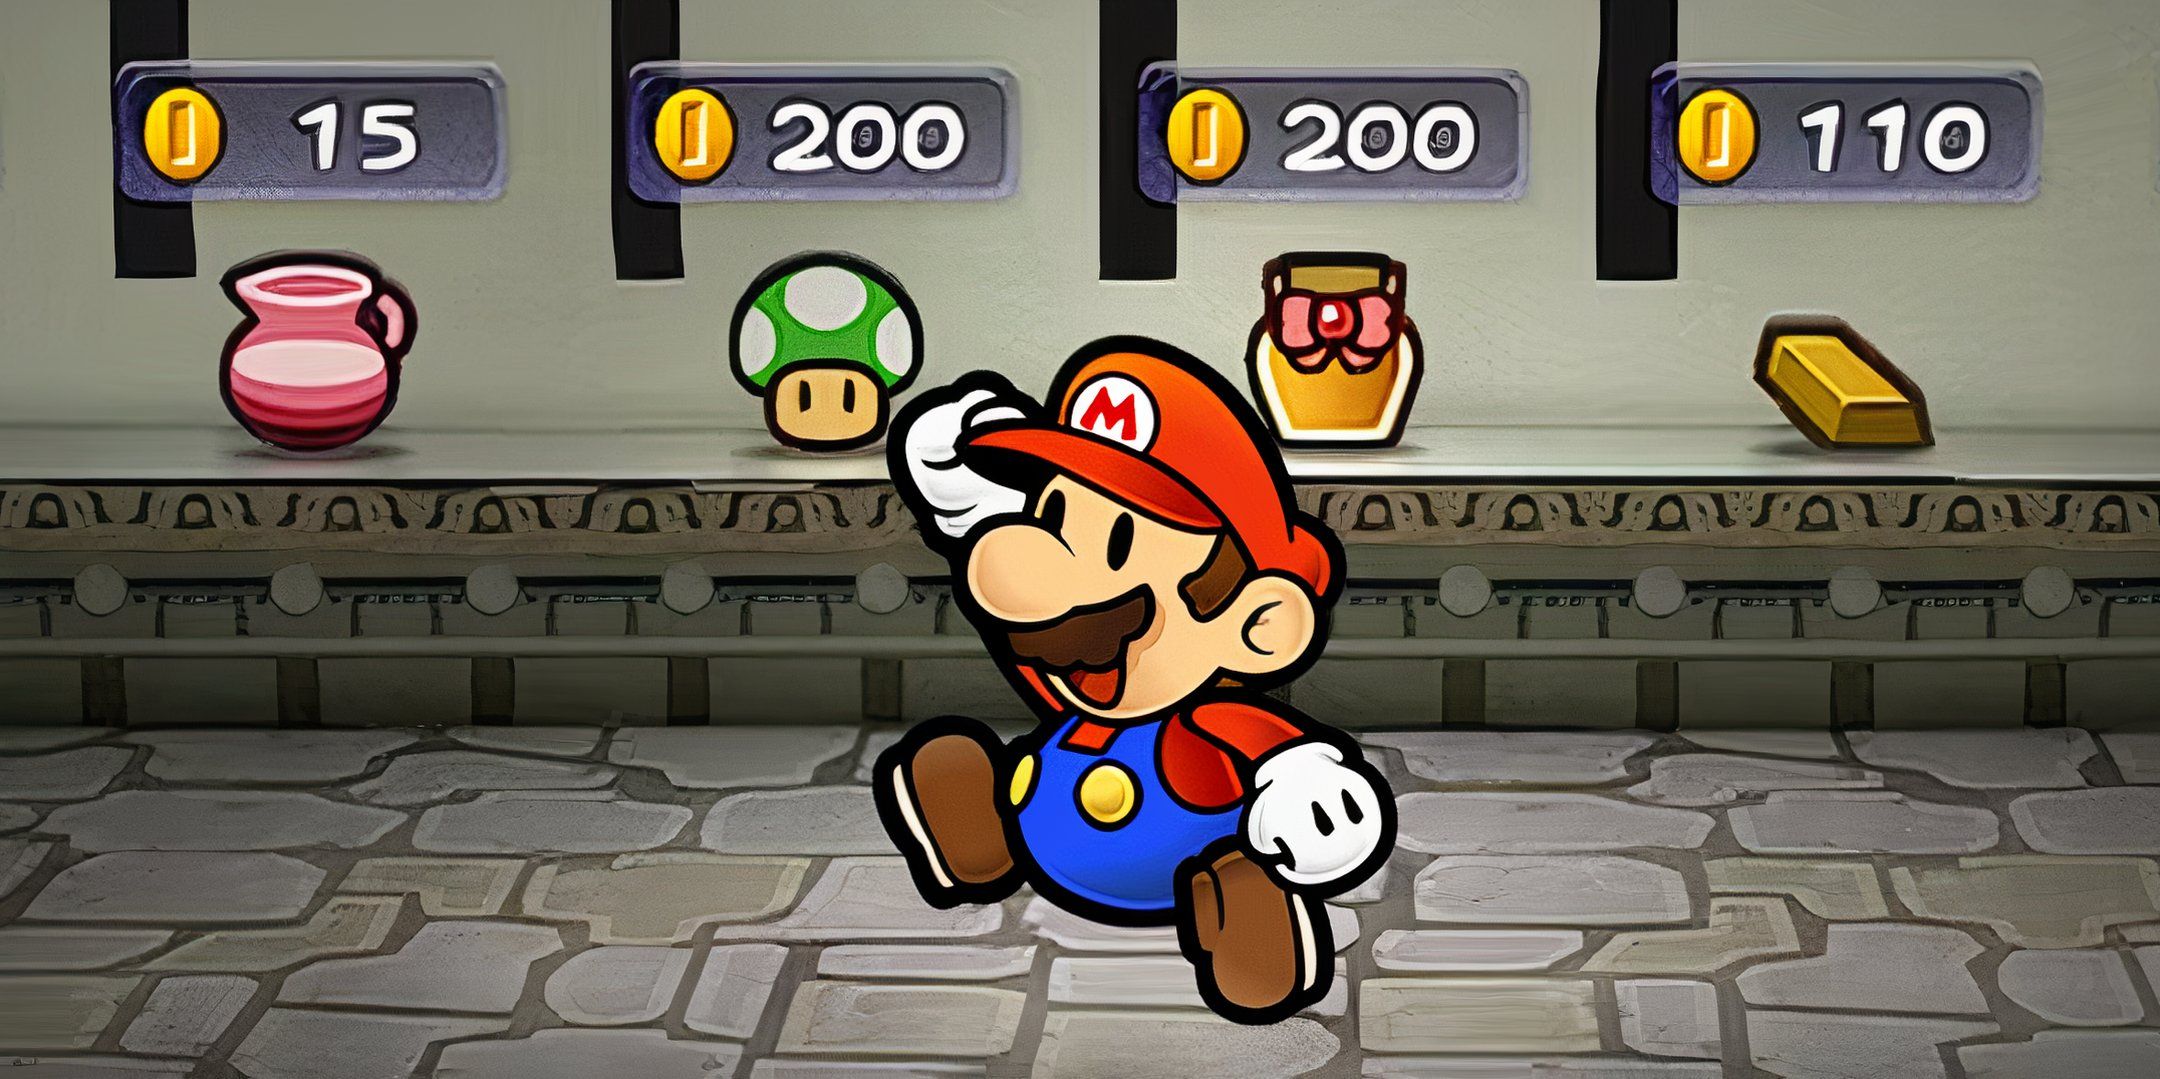 Paper Mario: The Thousand-Year Door -  Rogueport Sewer Item Shop